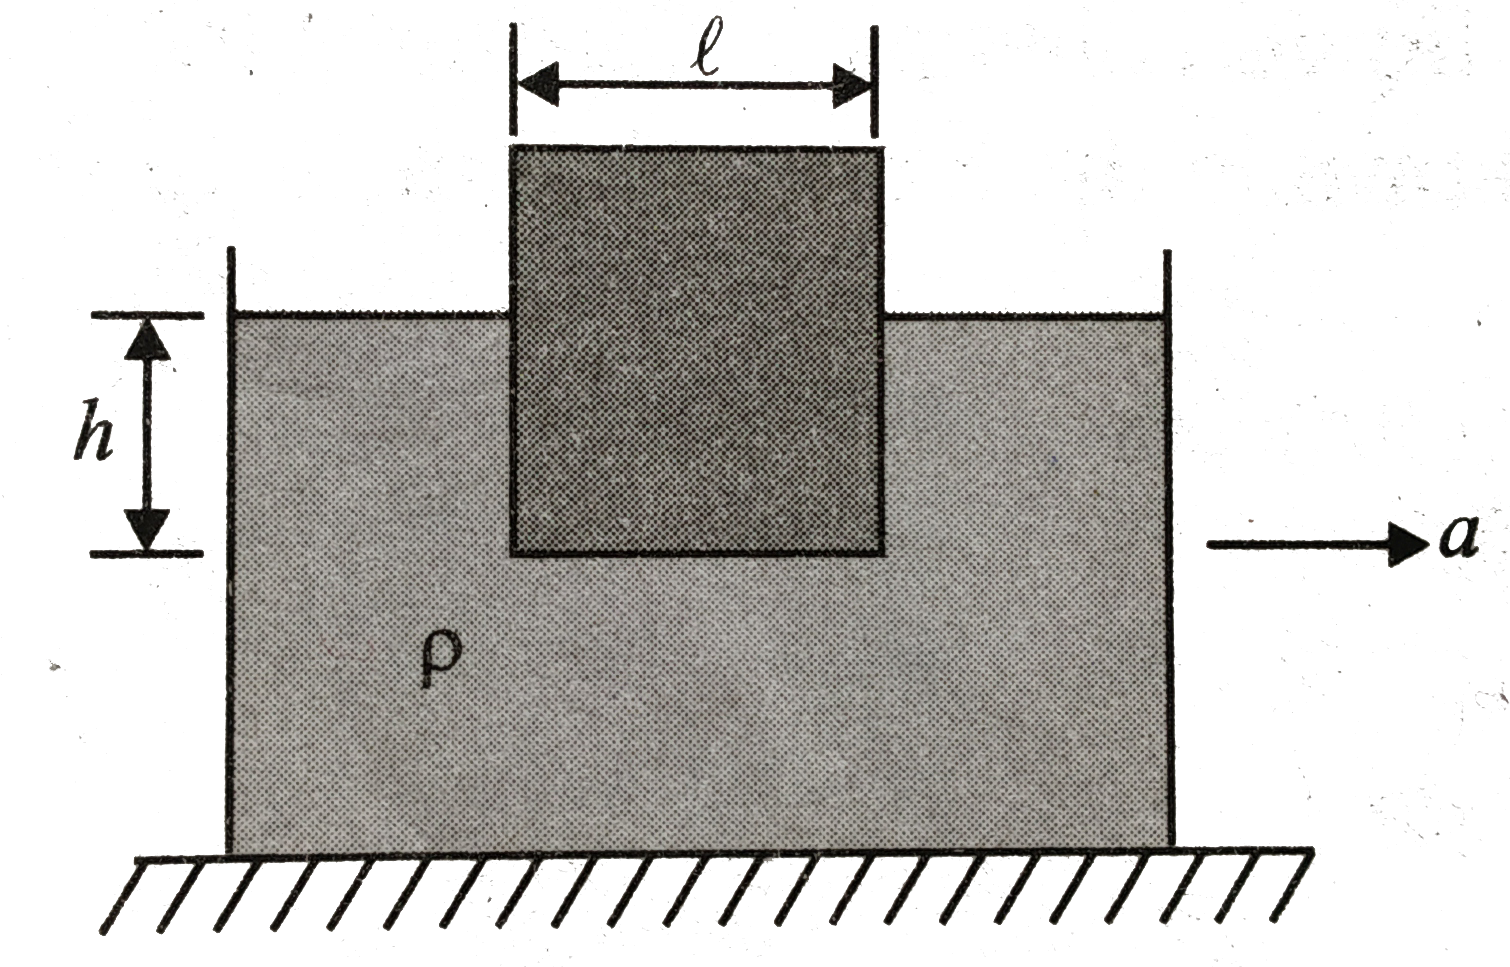 A wooden cube of length l and density a floats in a liquid of density p (gt a). If the liquid moves with an acceleration in steady state, find the a. net hydrostatic force acting on the cube b. angle of inclination of the cub with horizontal.